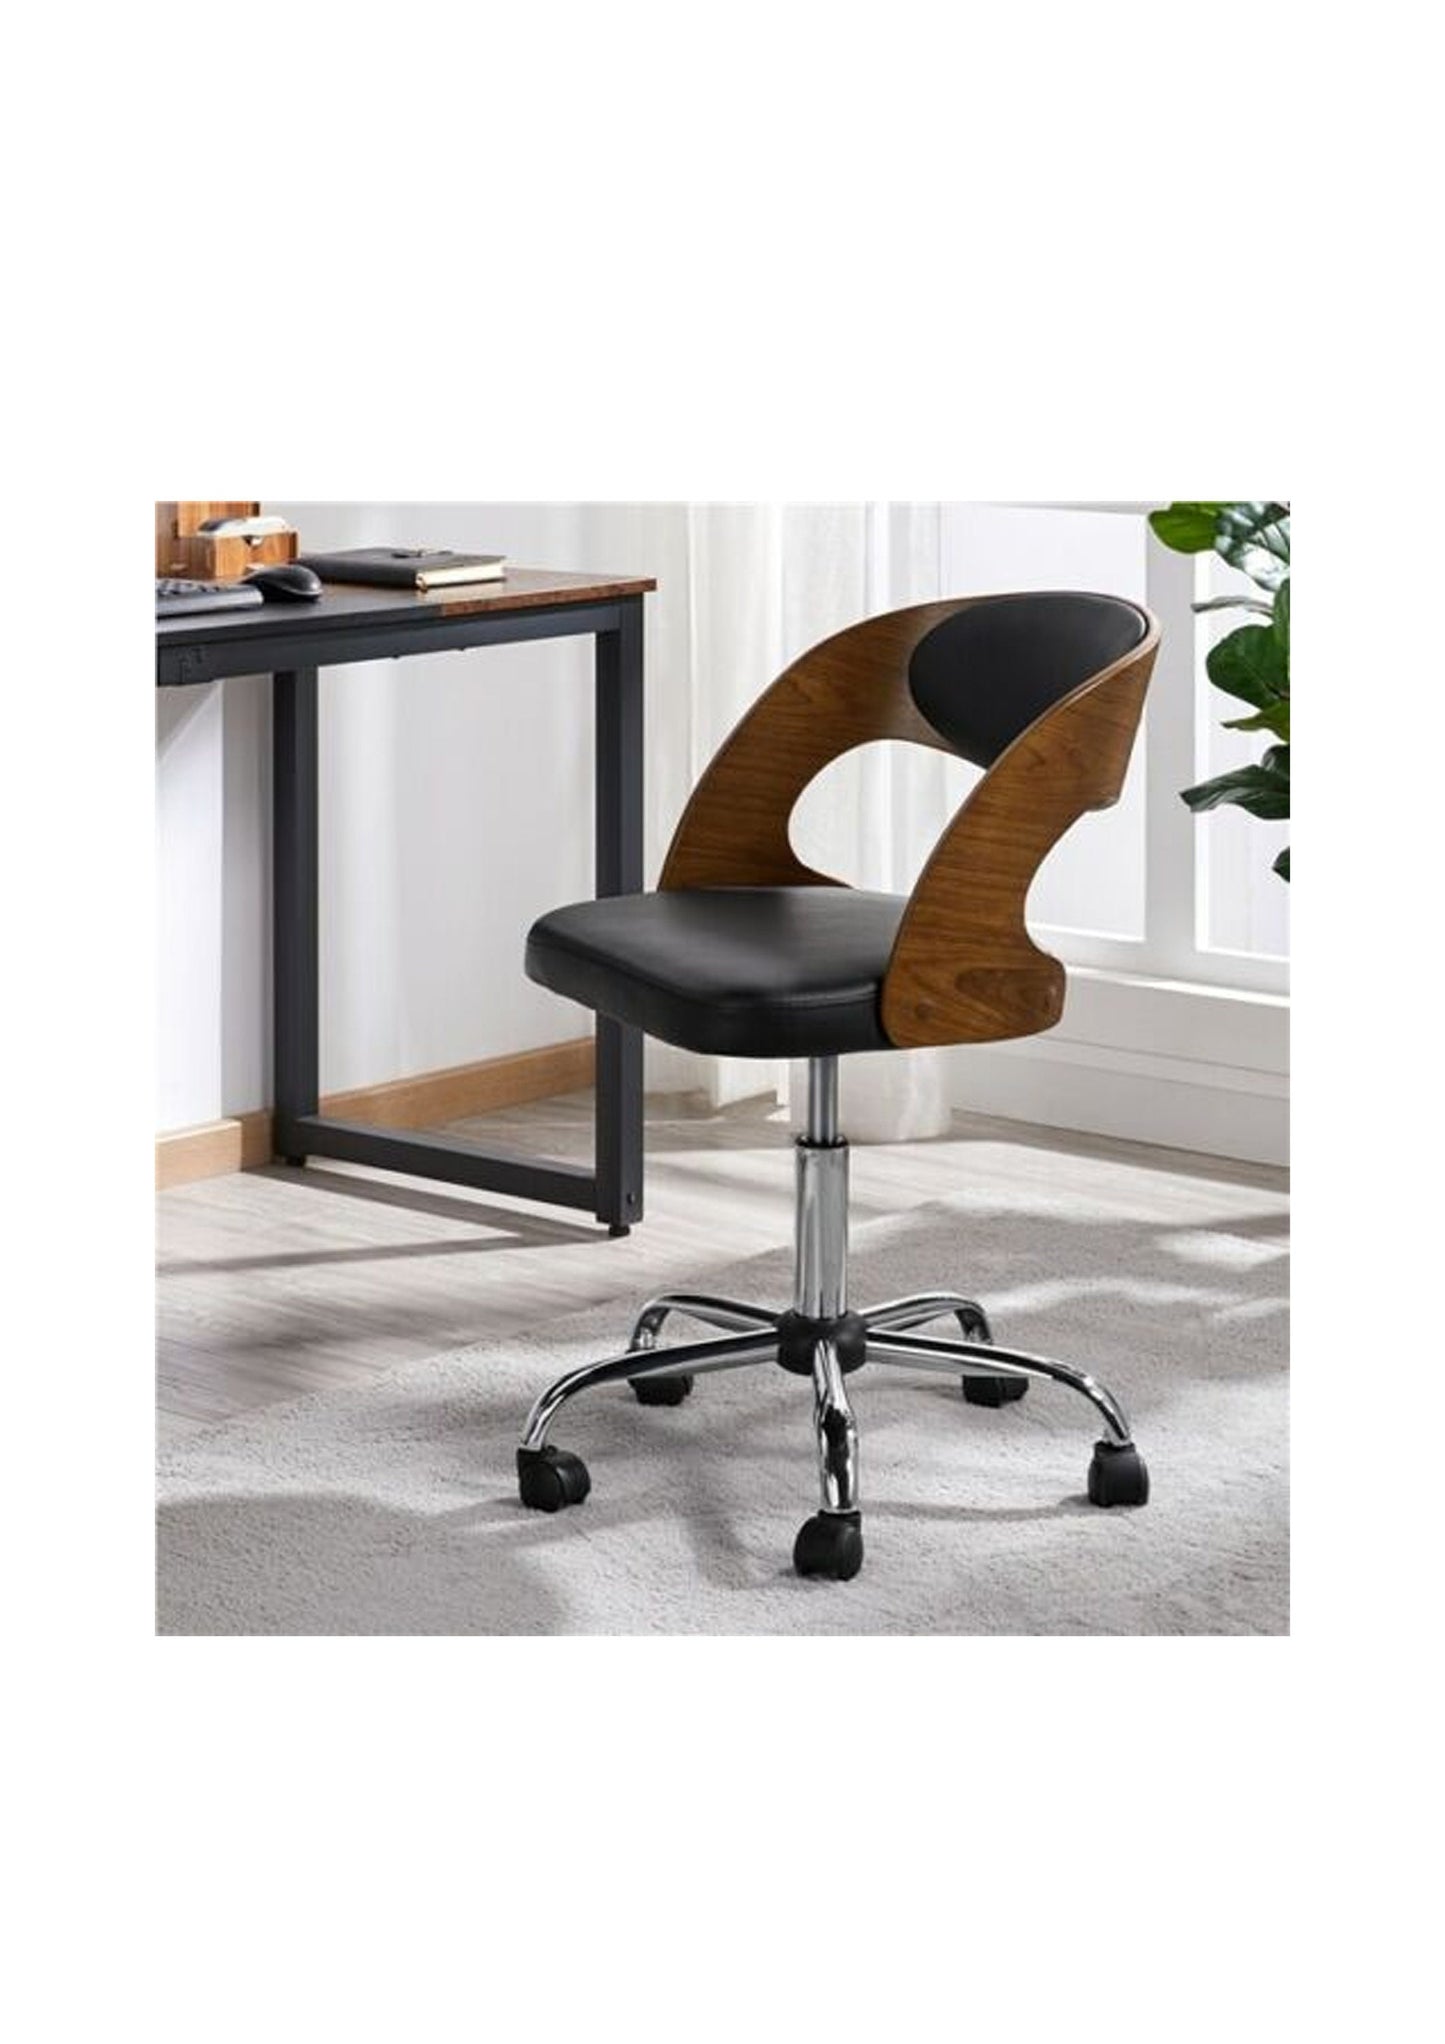 Retro Style Adjustable Office Desk Swivel Chair Bent Plywood and Faux Leather